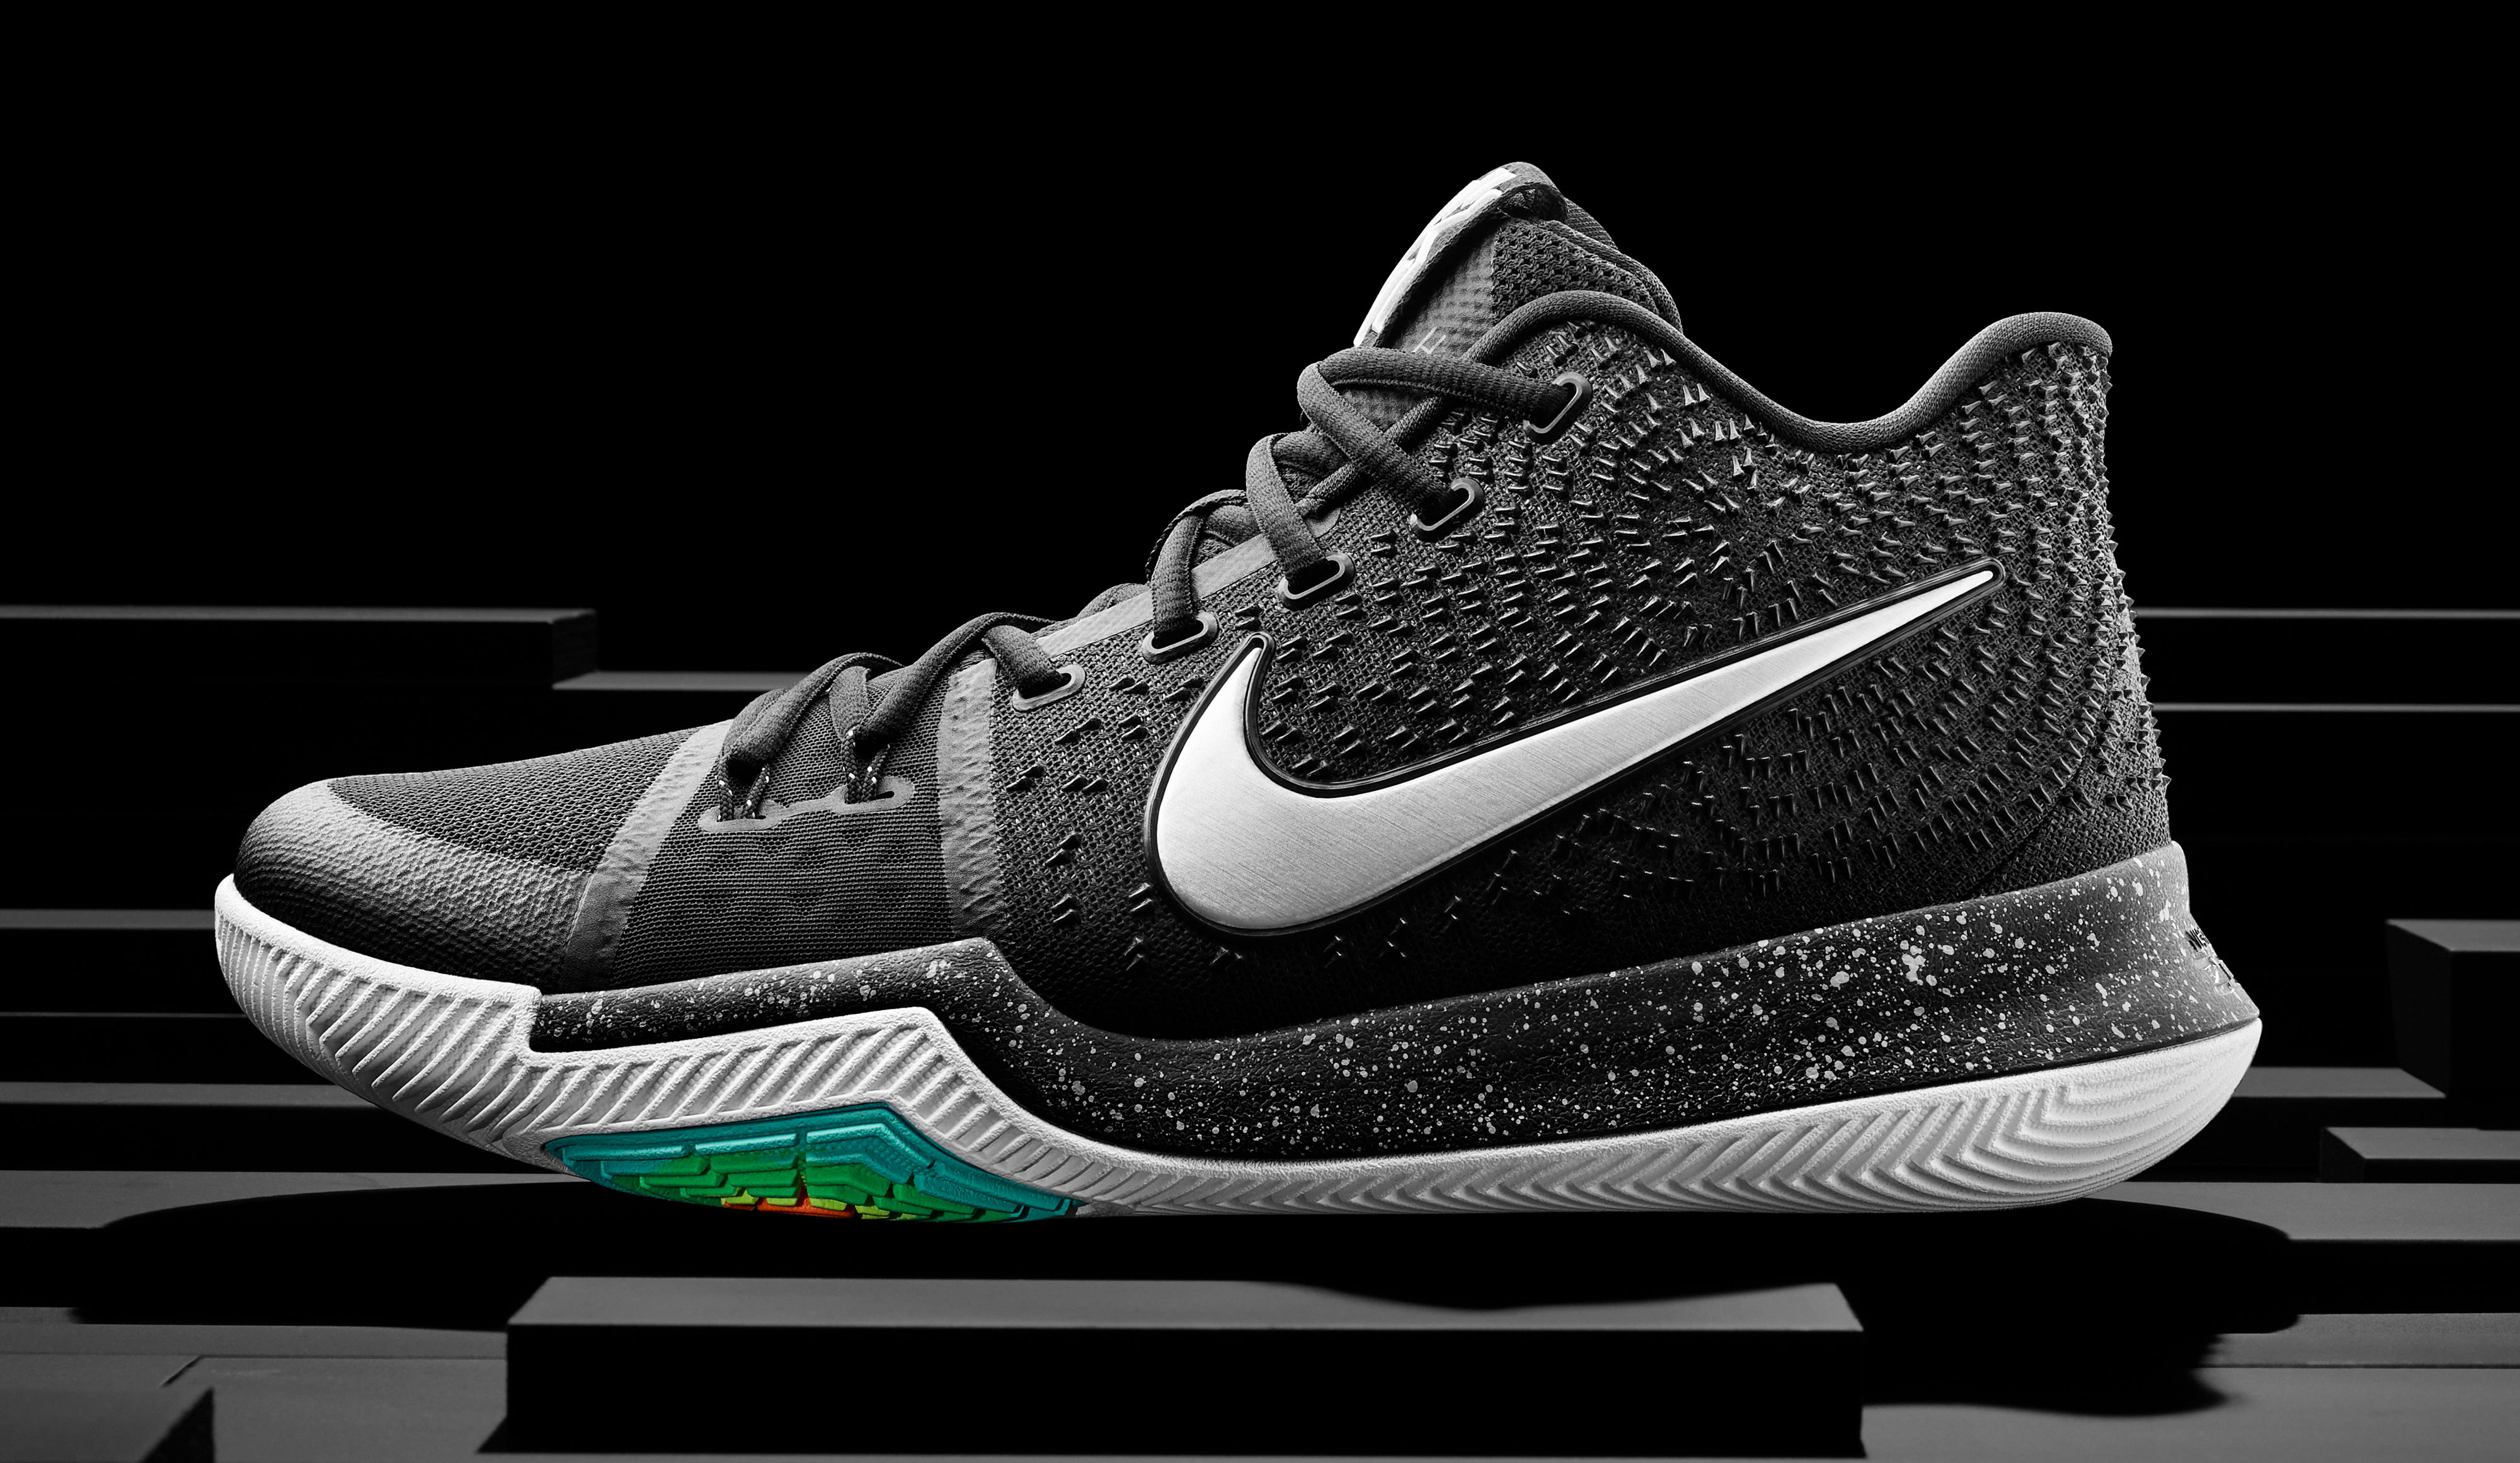 lebron james shoe release kyrie irving shoe price